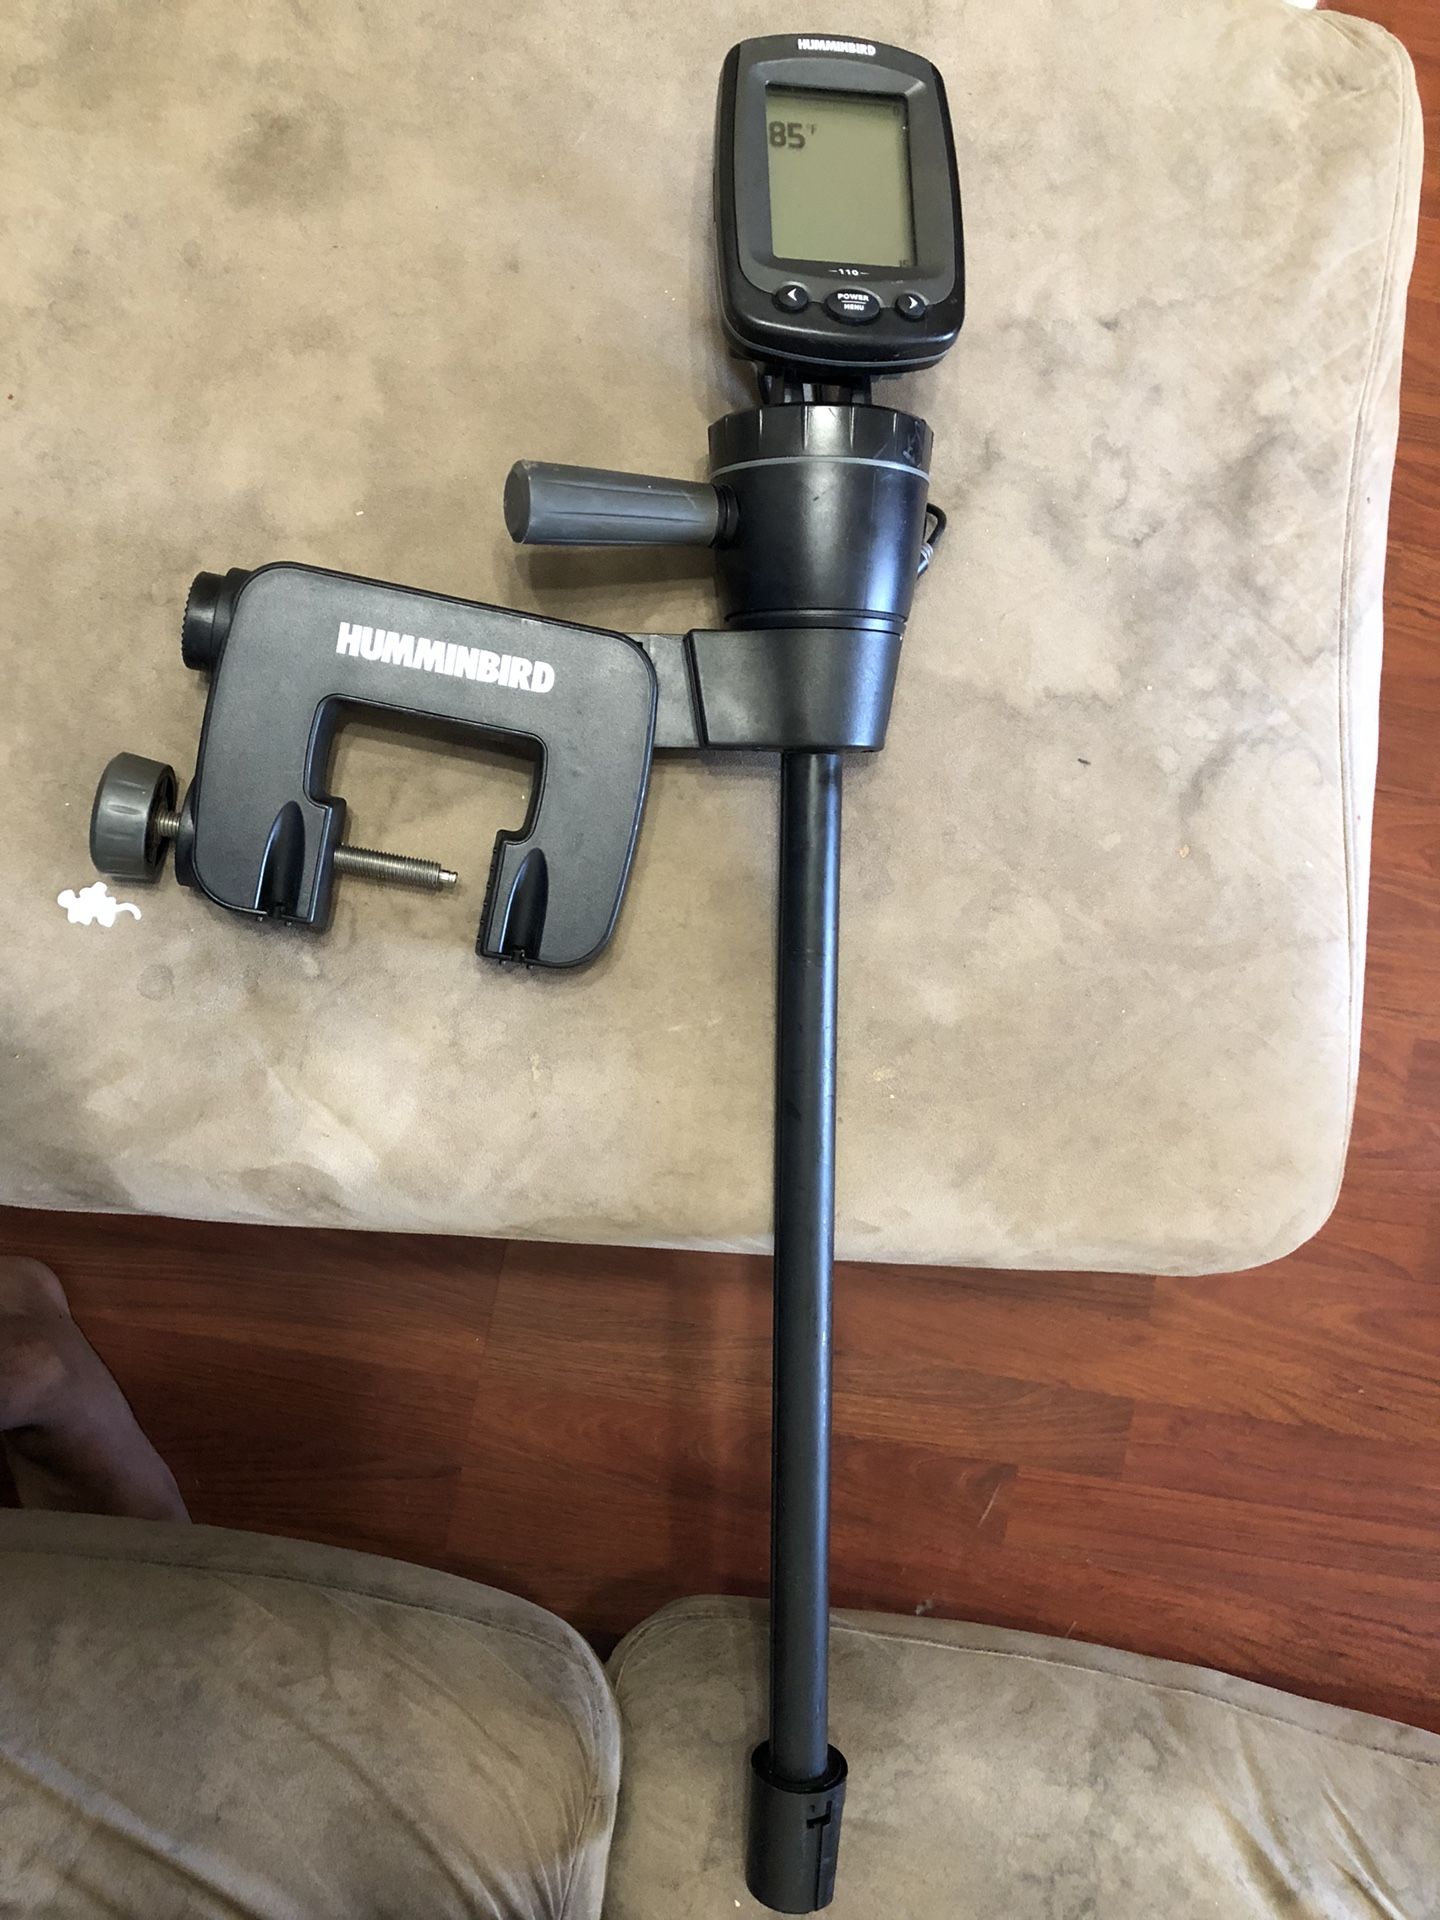 Portable fish and deep finder humminbird 110 for Sale in Tampa, FL - OfferUp